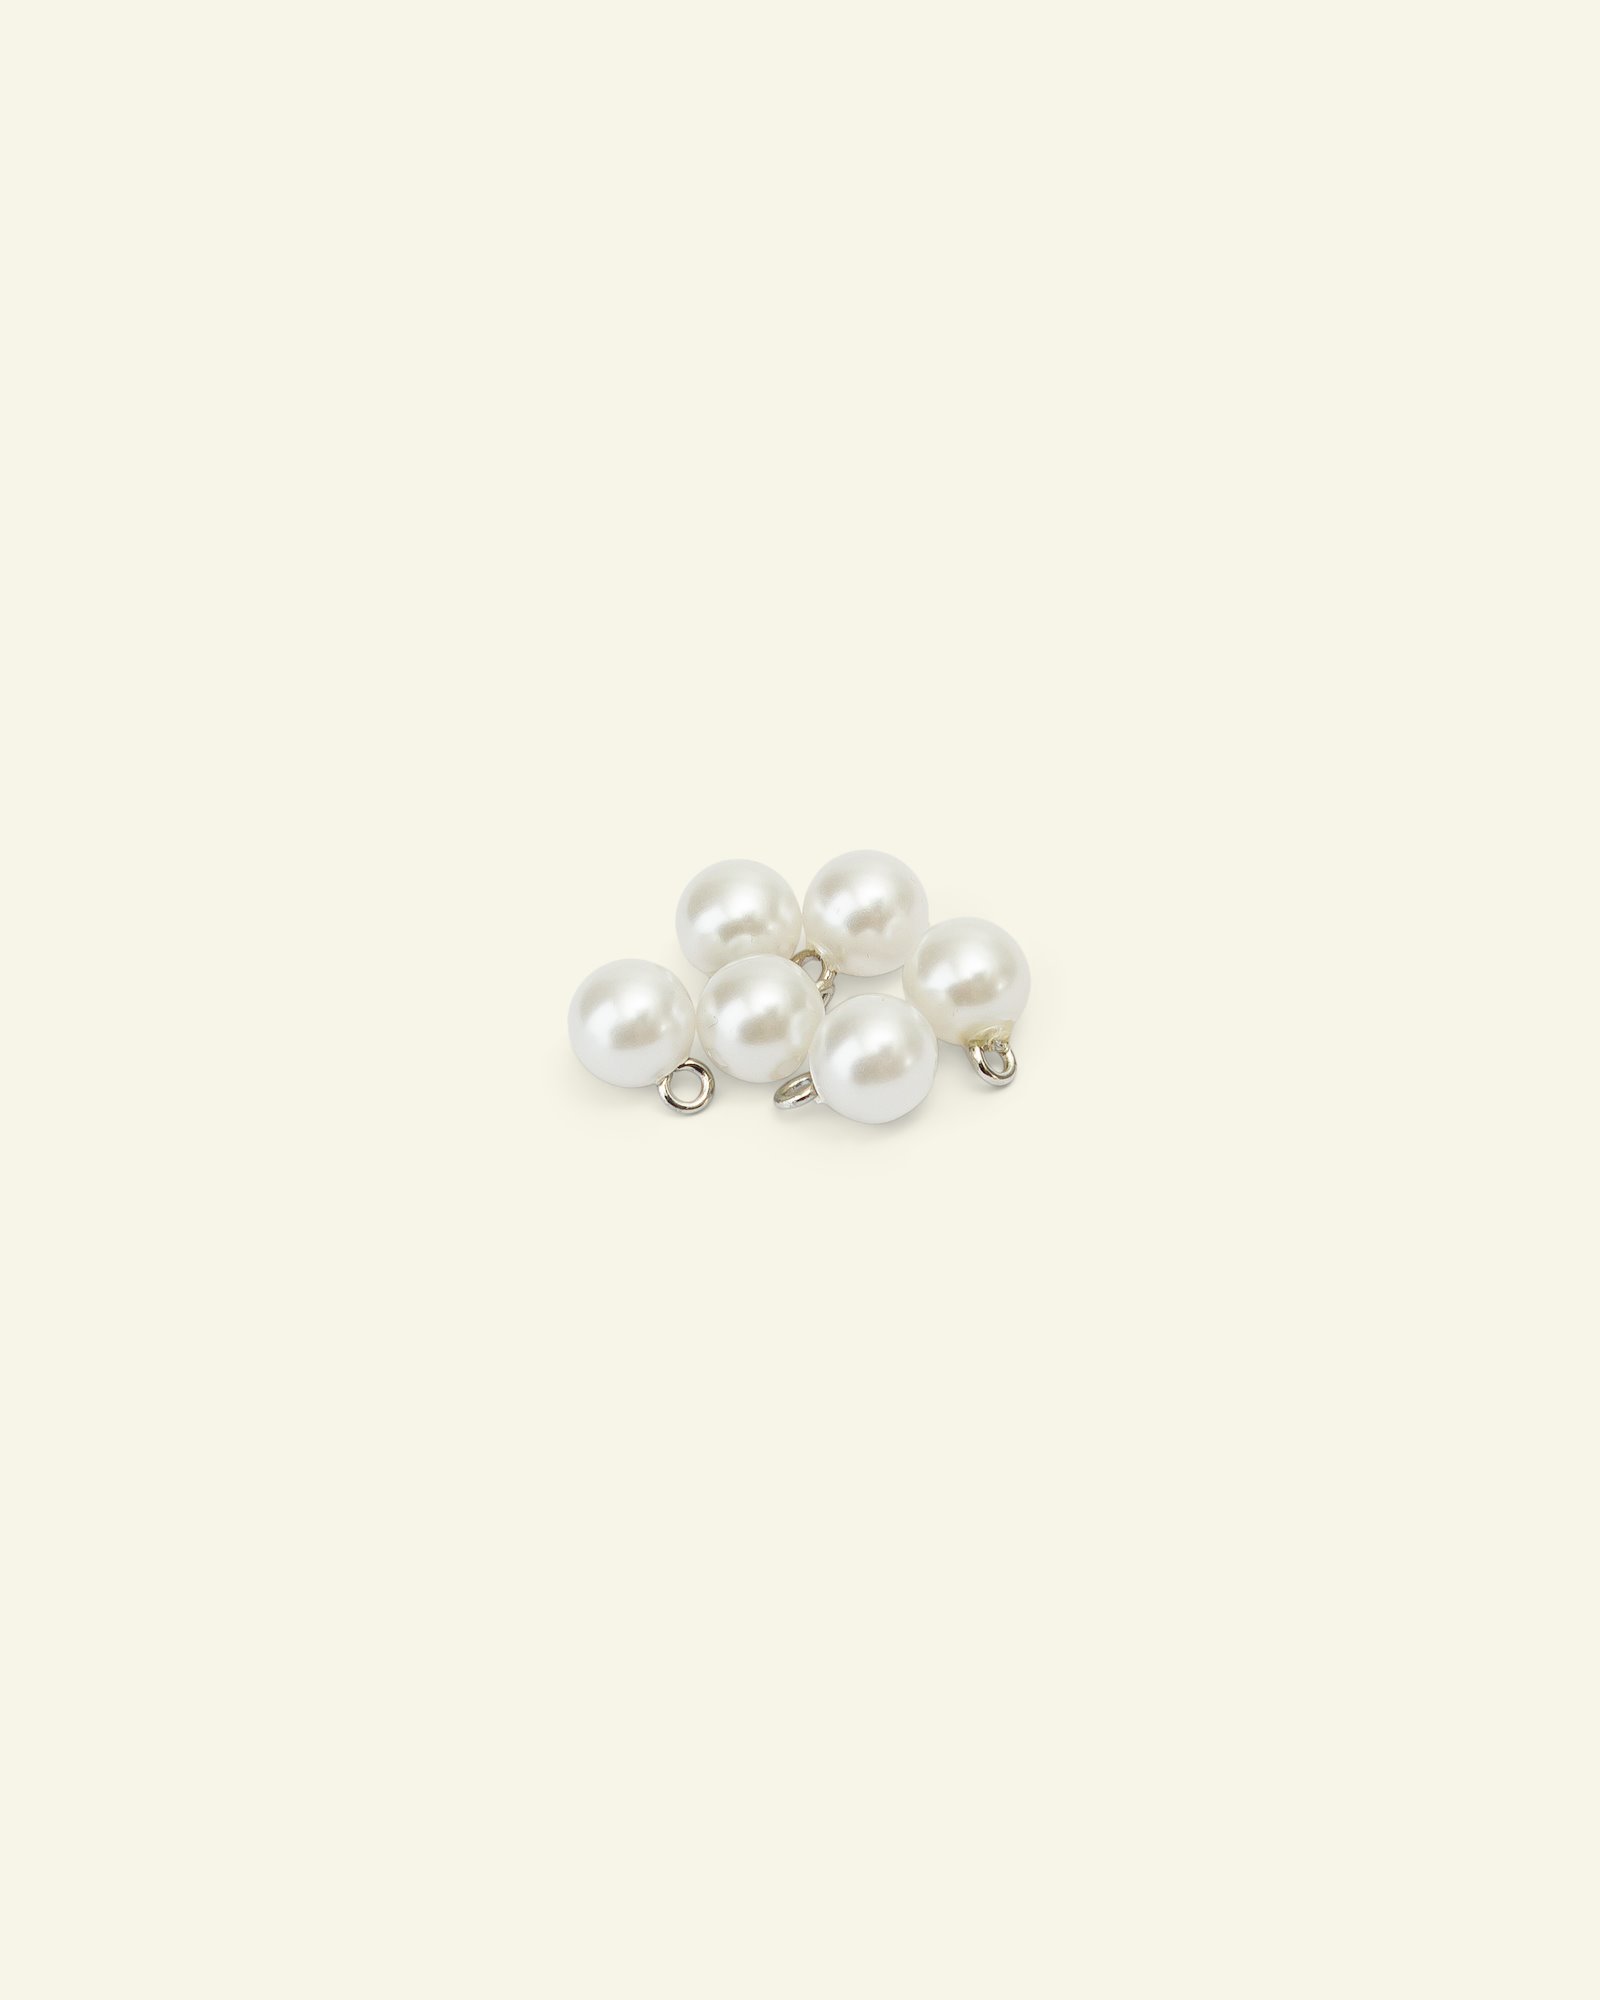 Shank button pearl 8mm white 6pcs 33079_pack